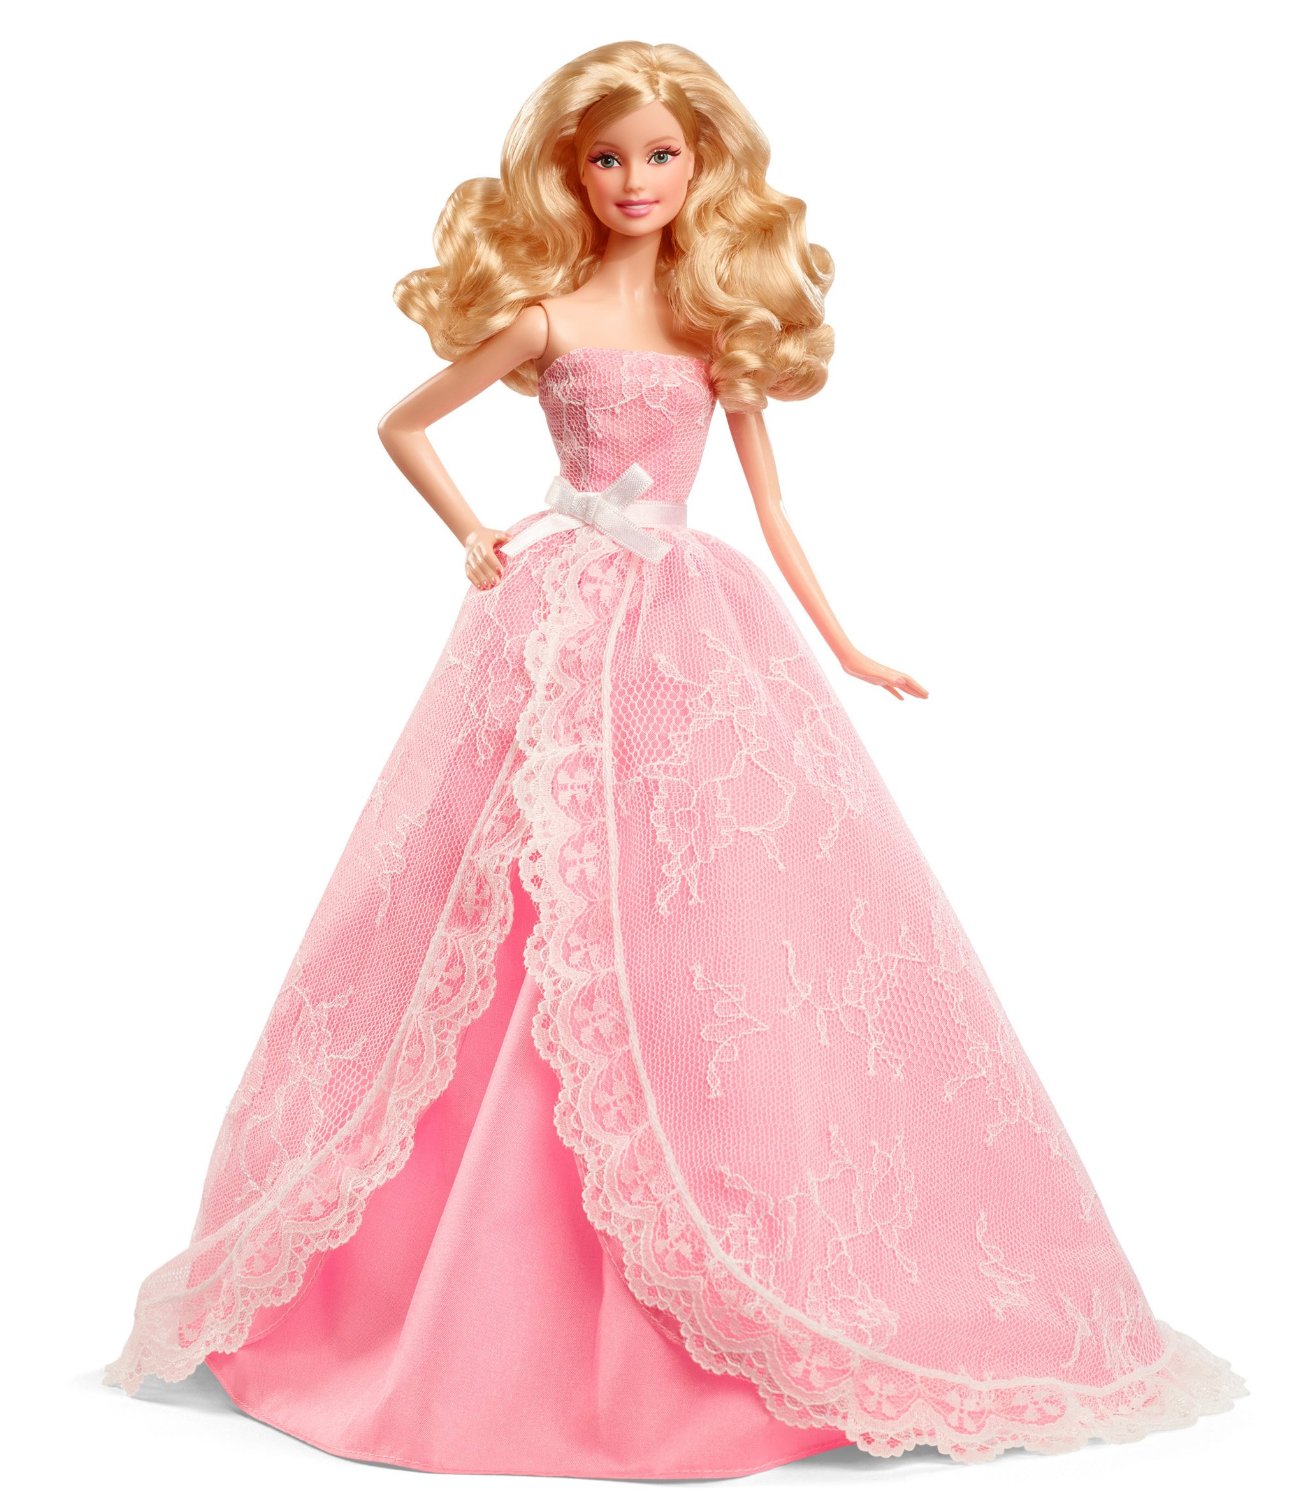 Barbie 2015 Birthday Wishes Barbie Doll (Discontinued by ...